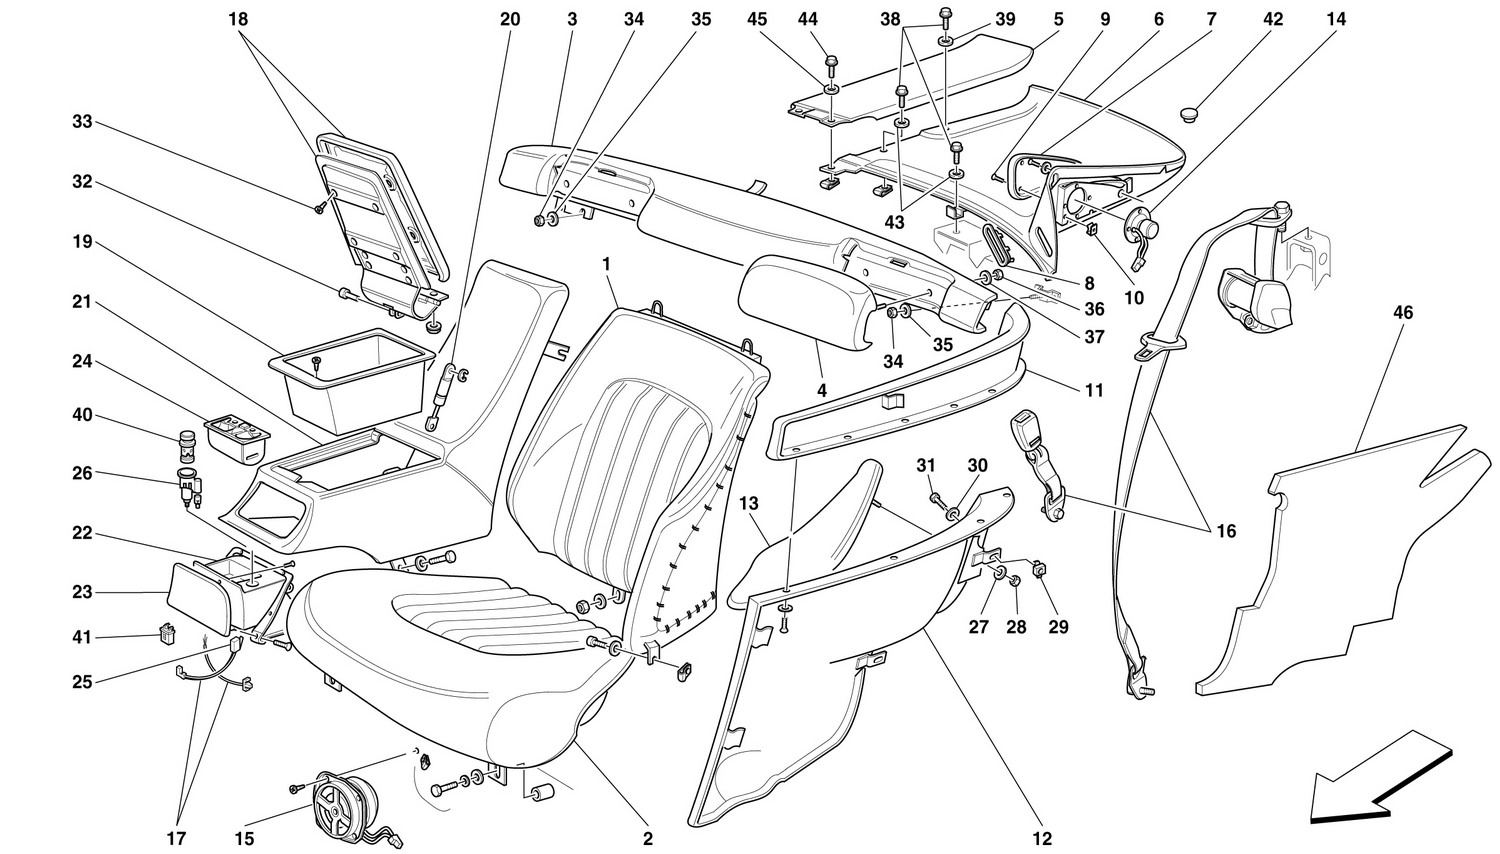 Schematic: Rear Seats And Seat Belts